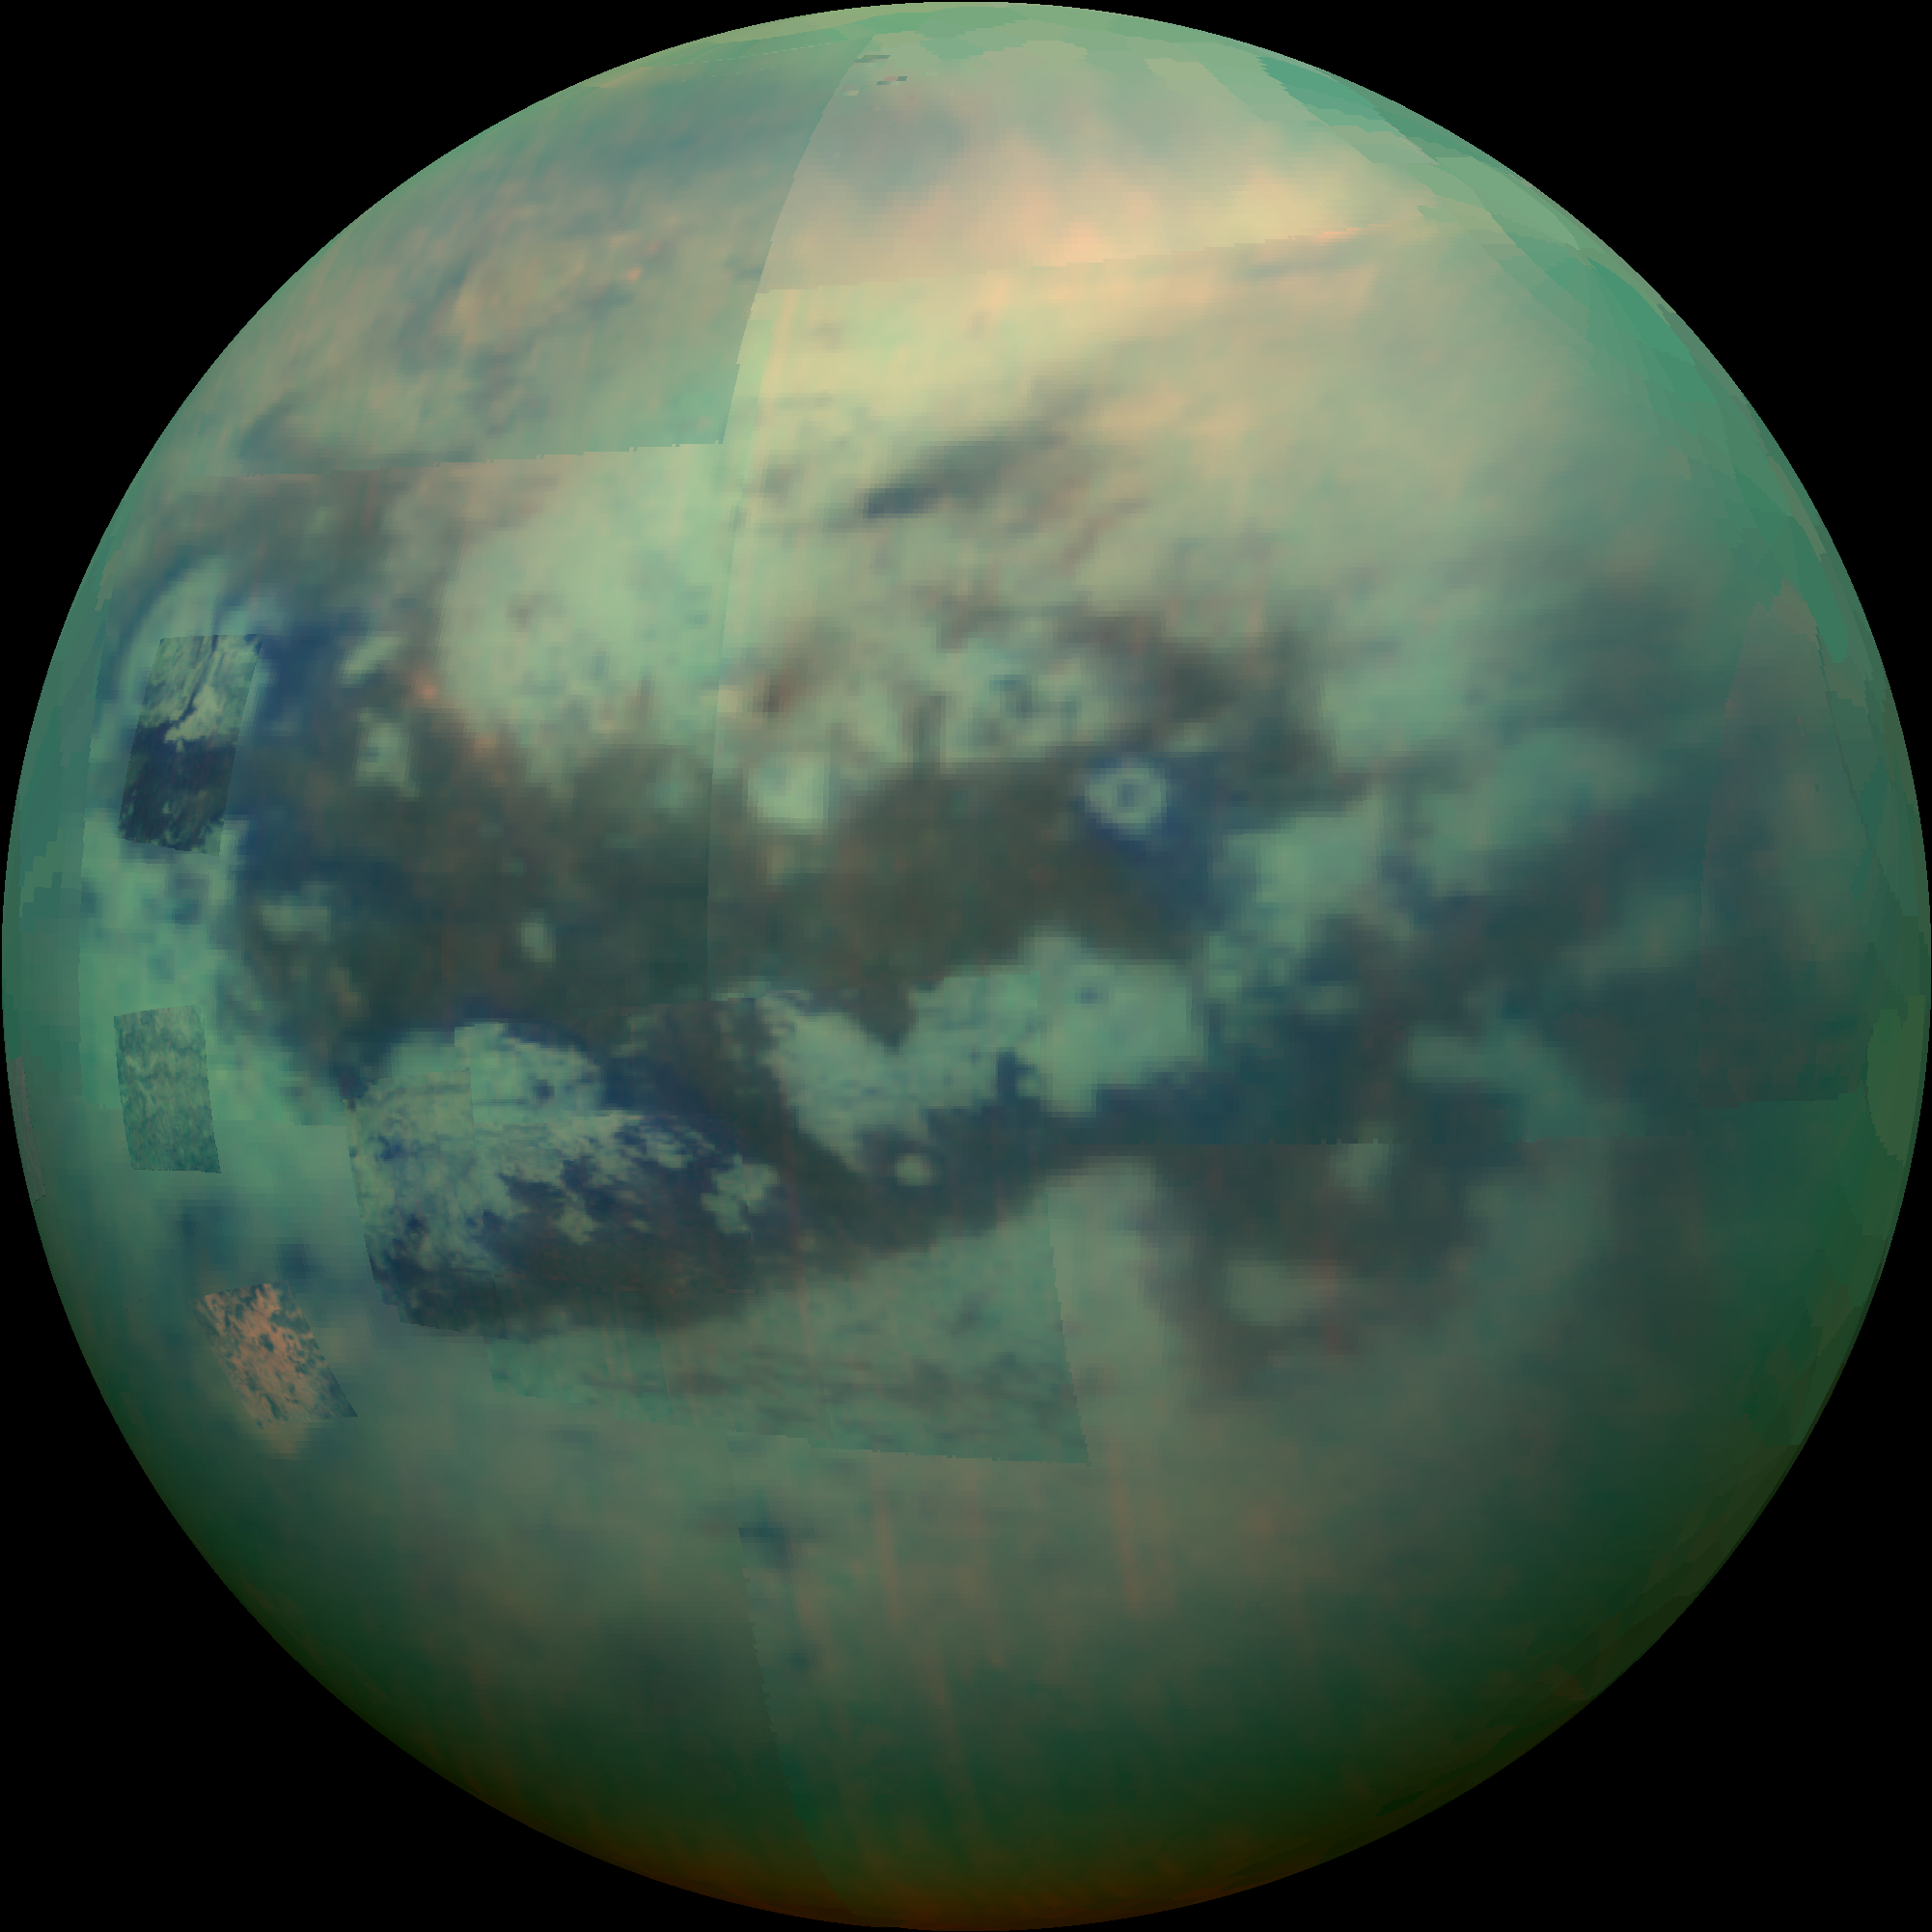 This composite image shows an infrared view of Saturn's moon Titan from NASA's Cassini spacecraft, acquired during the mission's "T-114" flyby on Nov. 13, 2015. Courtesy: NASA/JPL